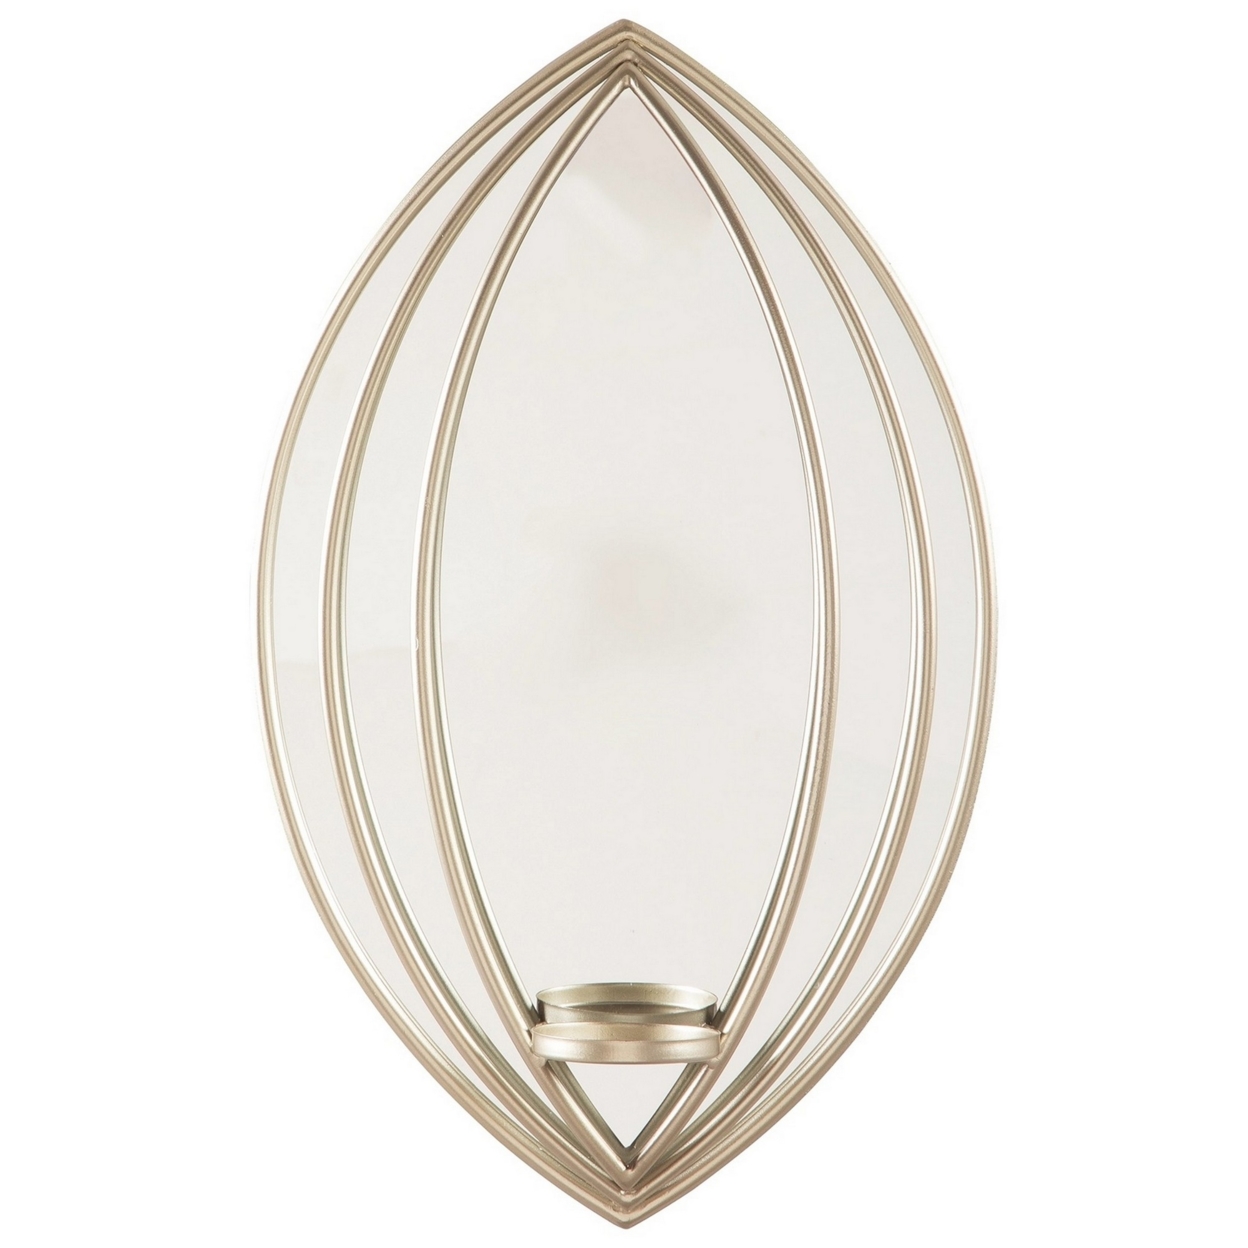 Caged Oval Metal Wall Sconce With Mirror Insert, Silver- Saltoro Sherpi